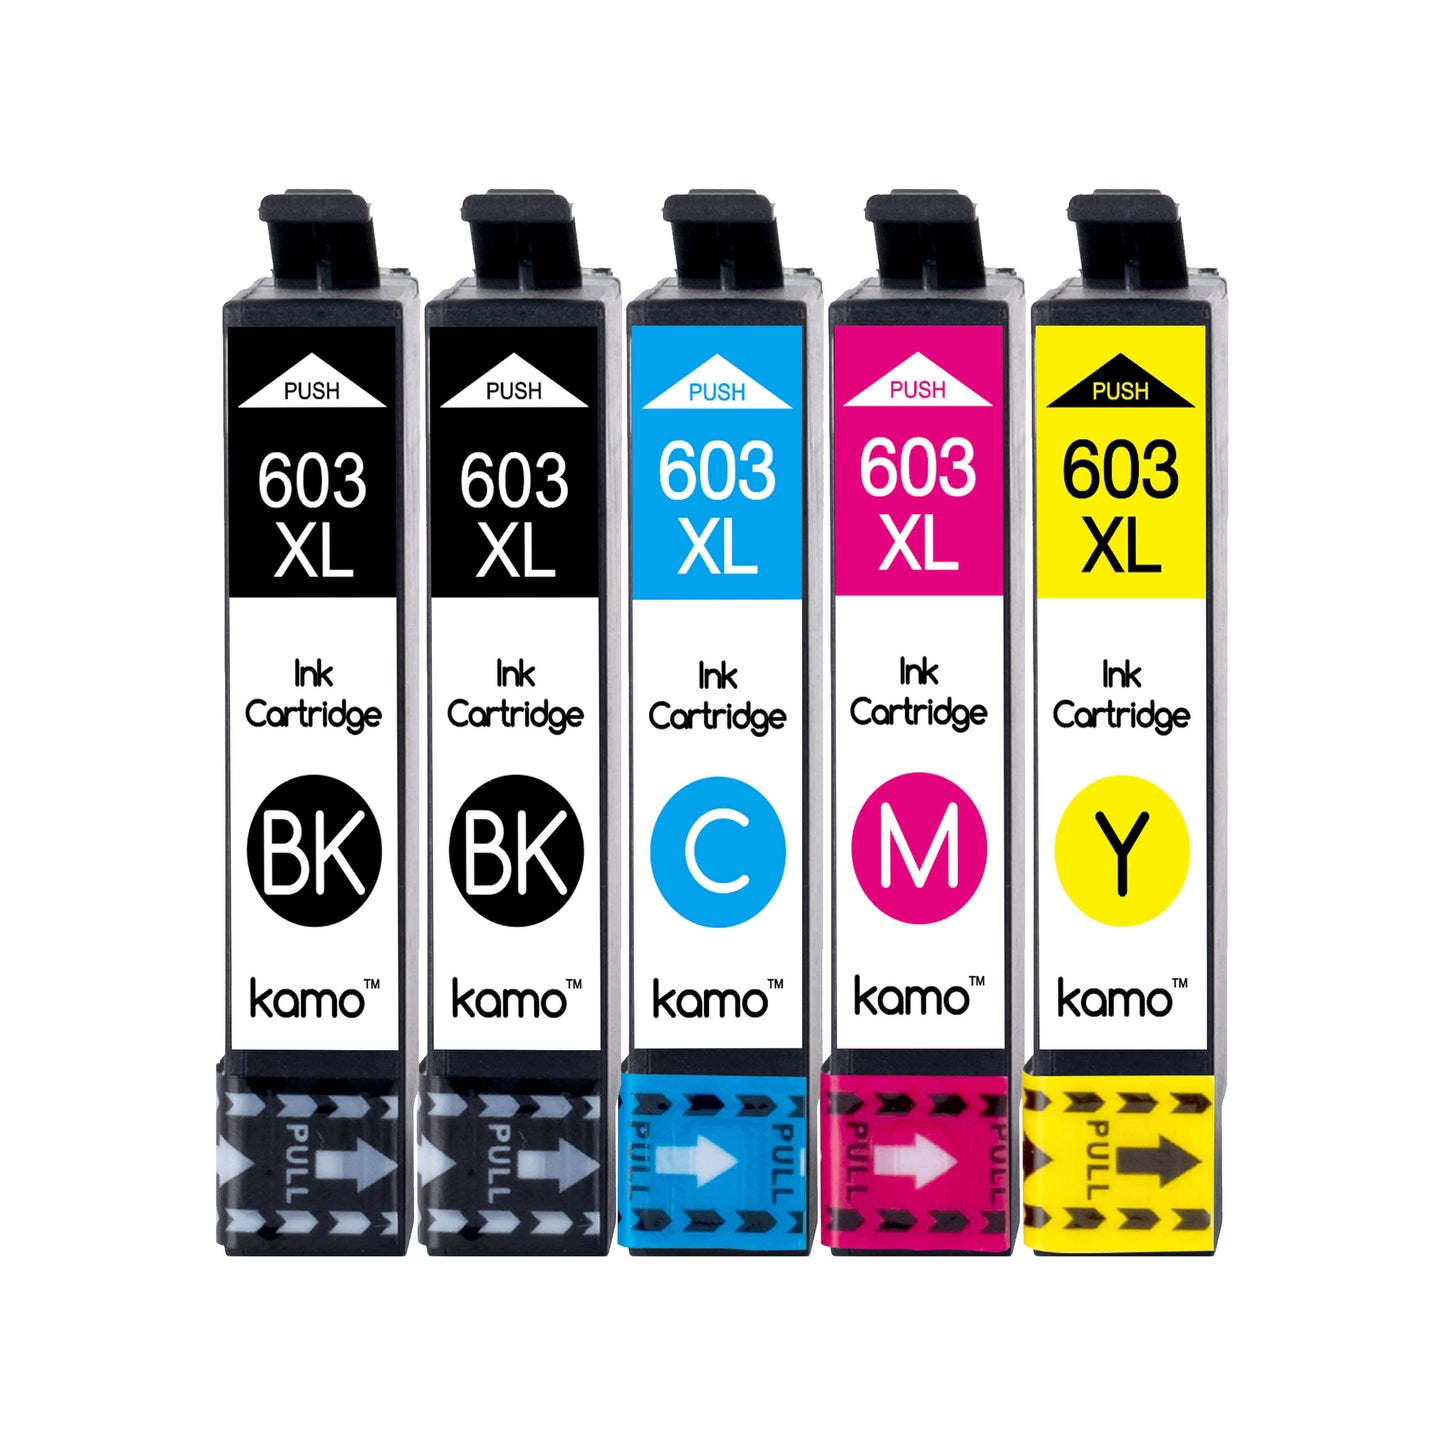 Kamo 603 XL for Epson 603 603XL Ink Cartridges (5 Pack)